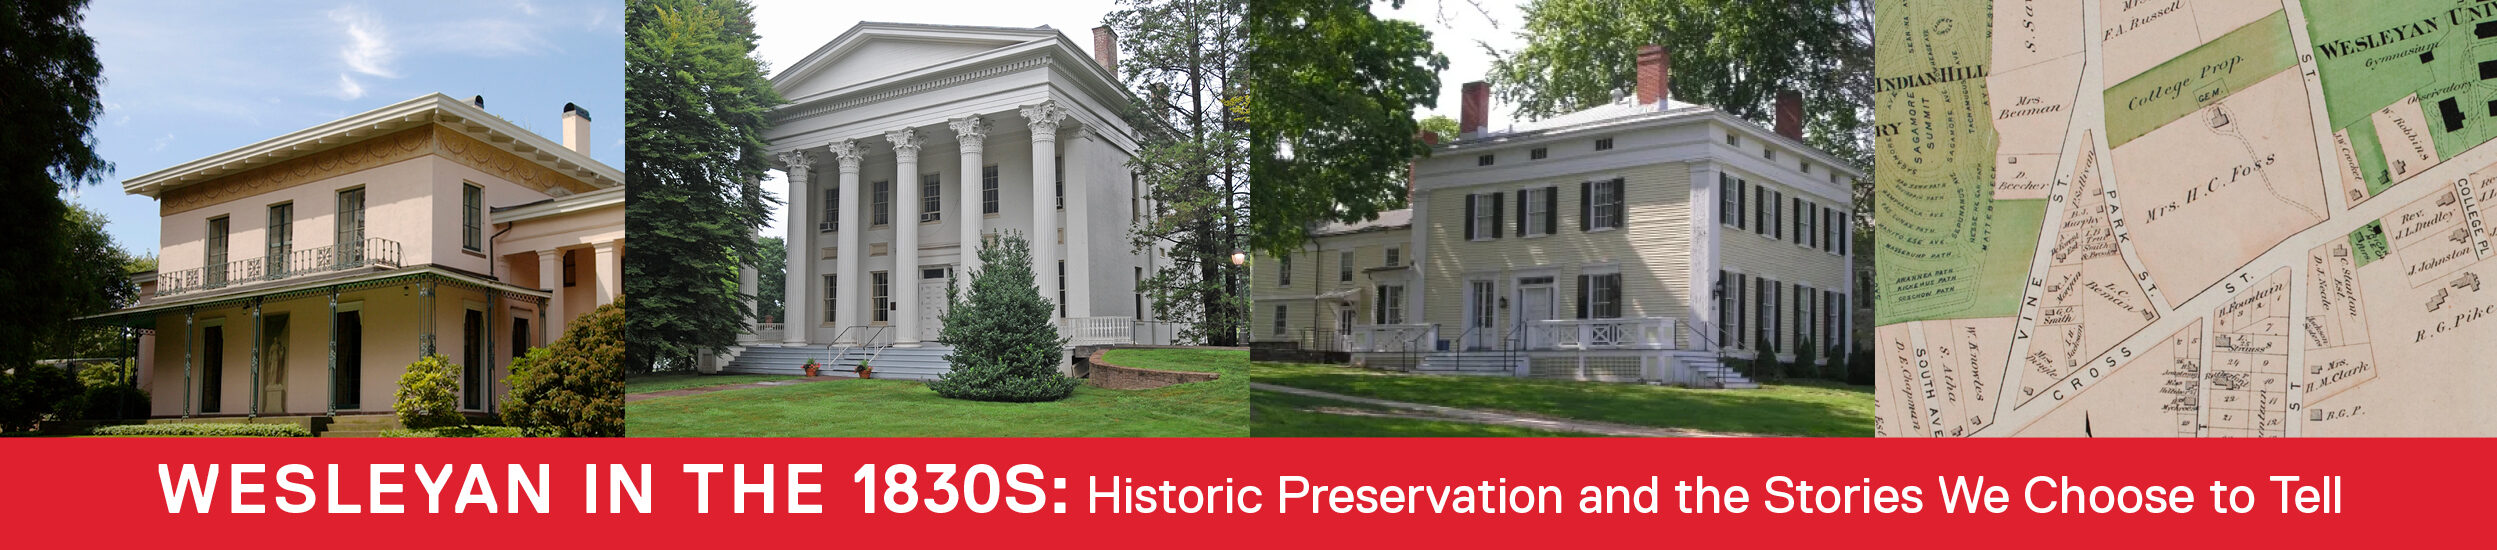 Wesleyan in the 1830s: Historic Preservation and the Stories We Choose to Tell